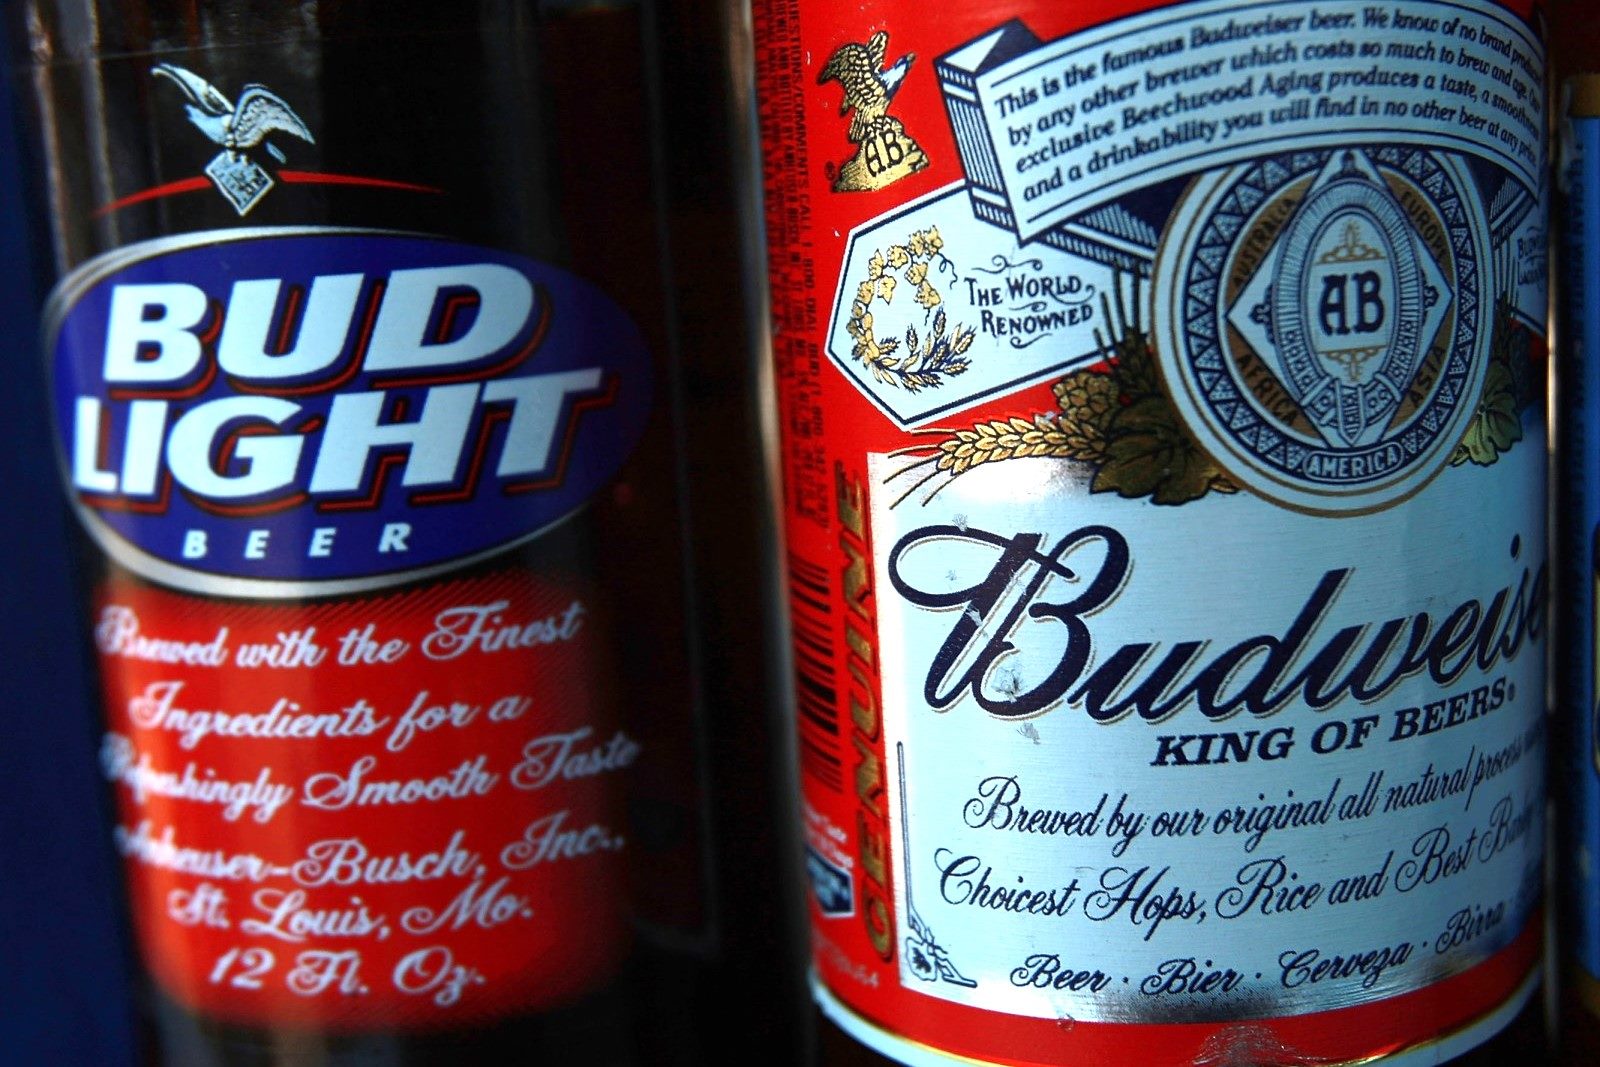 The Surprising Differences Between Bud Light And Budweiser - Prepare To Be Amazed!